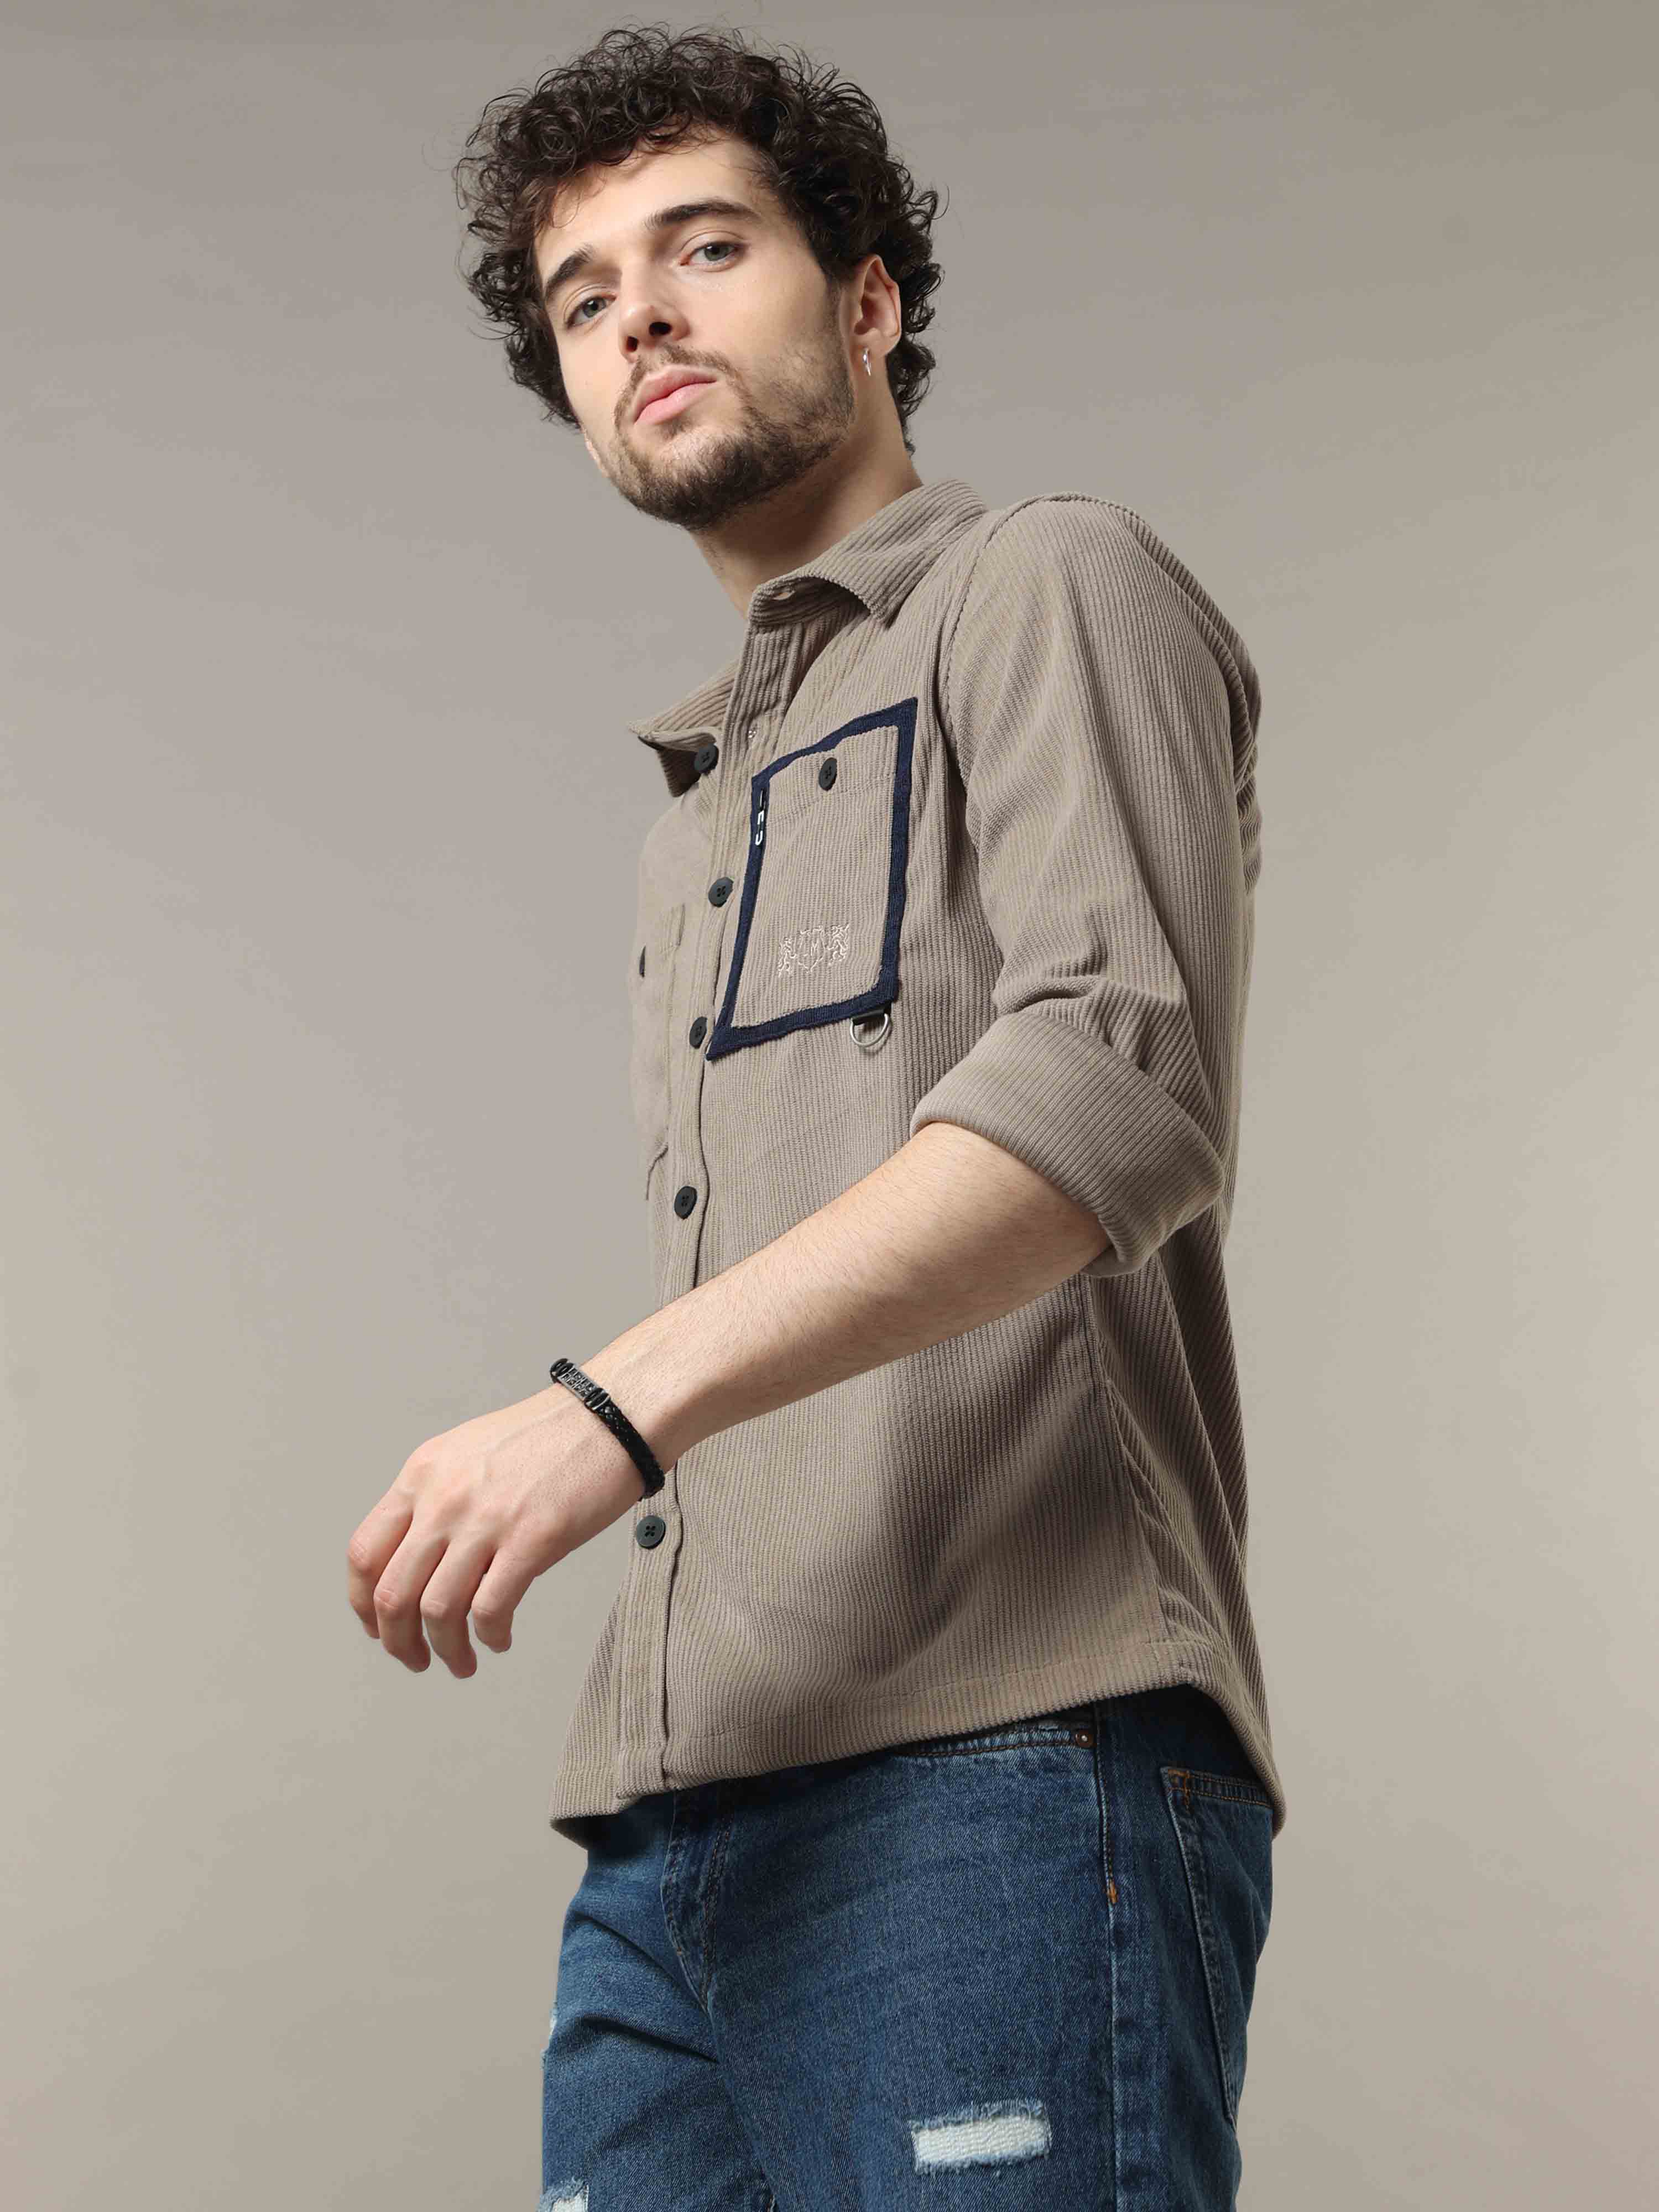 Wood Brown Corduroy Double Pocket with Contrast Patch Shirt